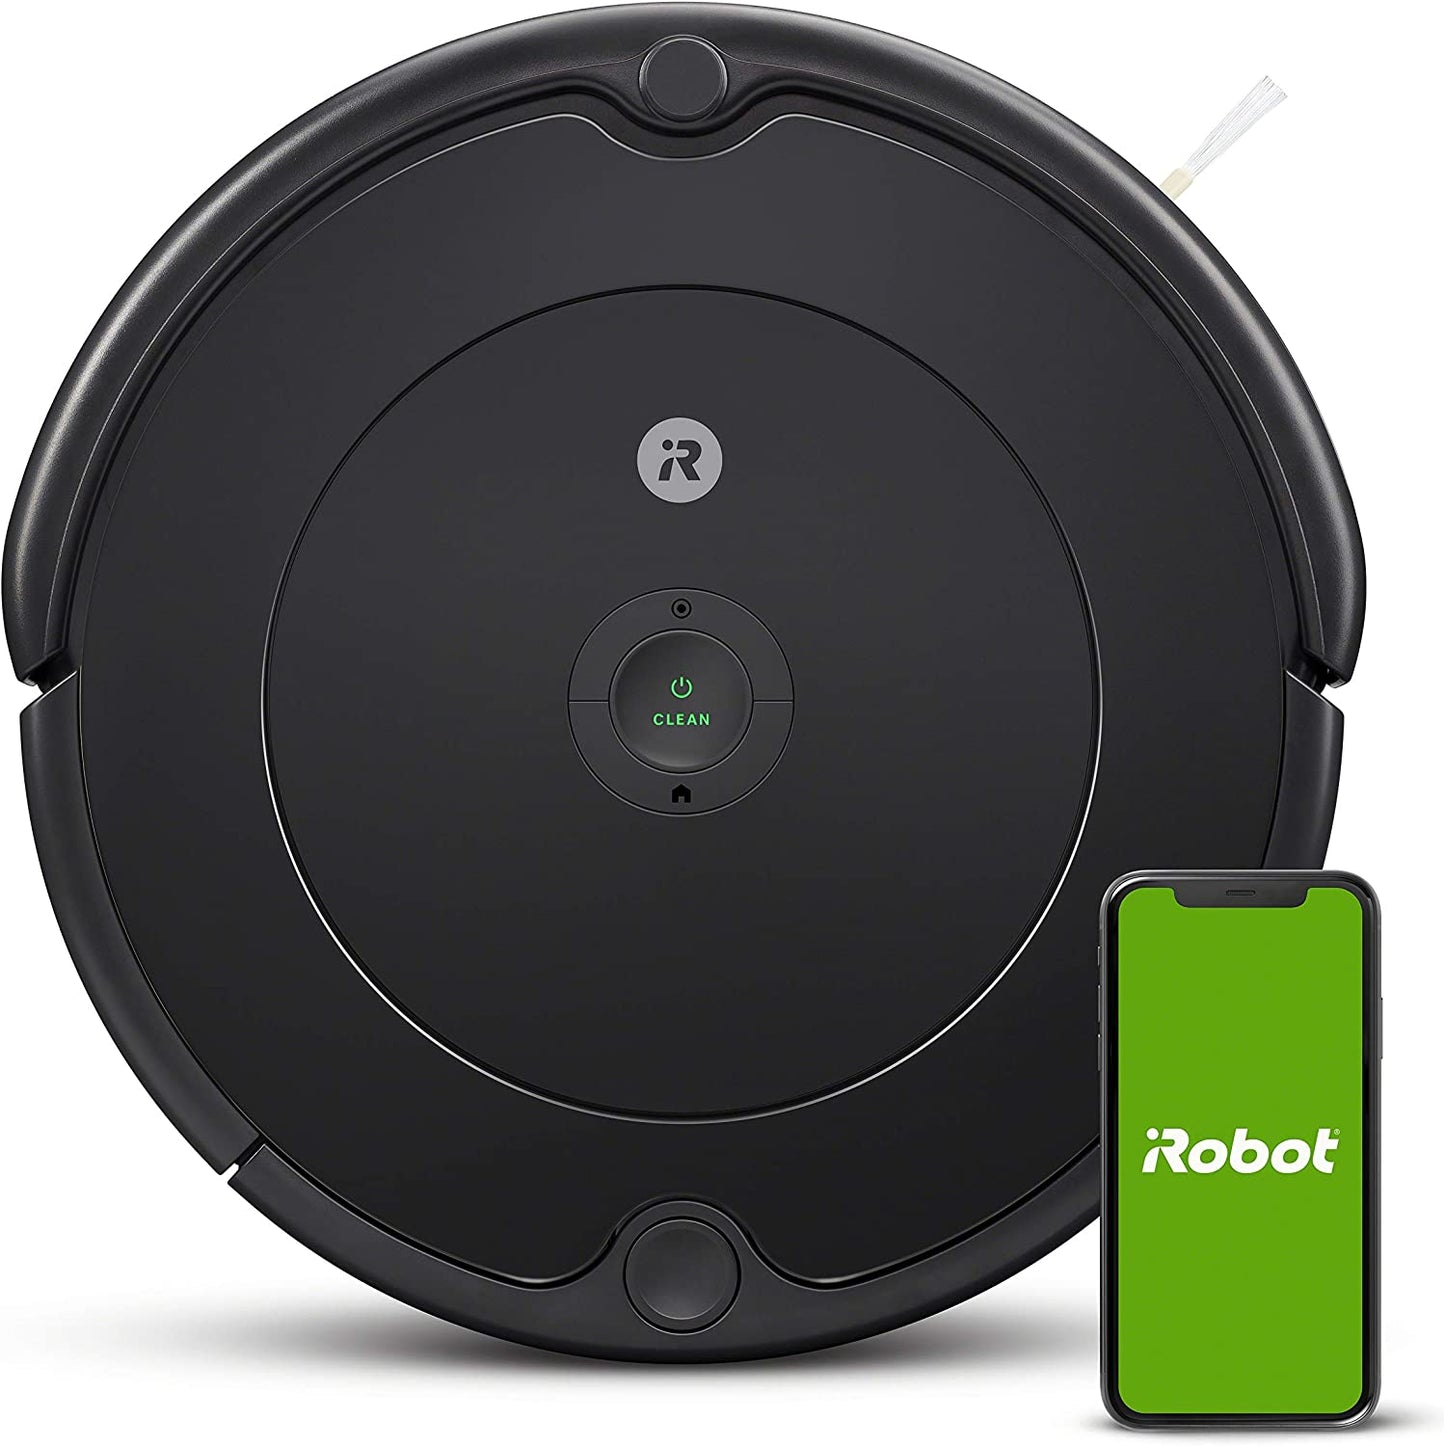 iRobot Roomba 692 Robot Vacuum-Wi-Fi Connectivity, Personalized Cleaning Recommendations, Works with Alexa, Good for Pet Hair, Carpets, Hard Floors, Self-Charging, Charcoal Grey